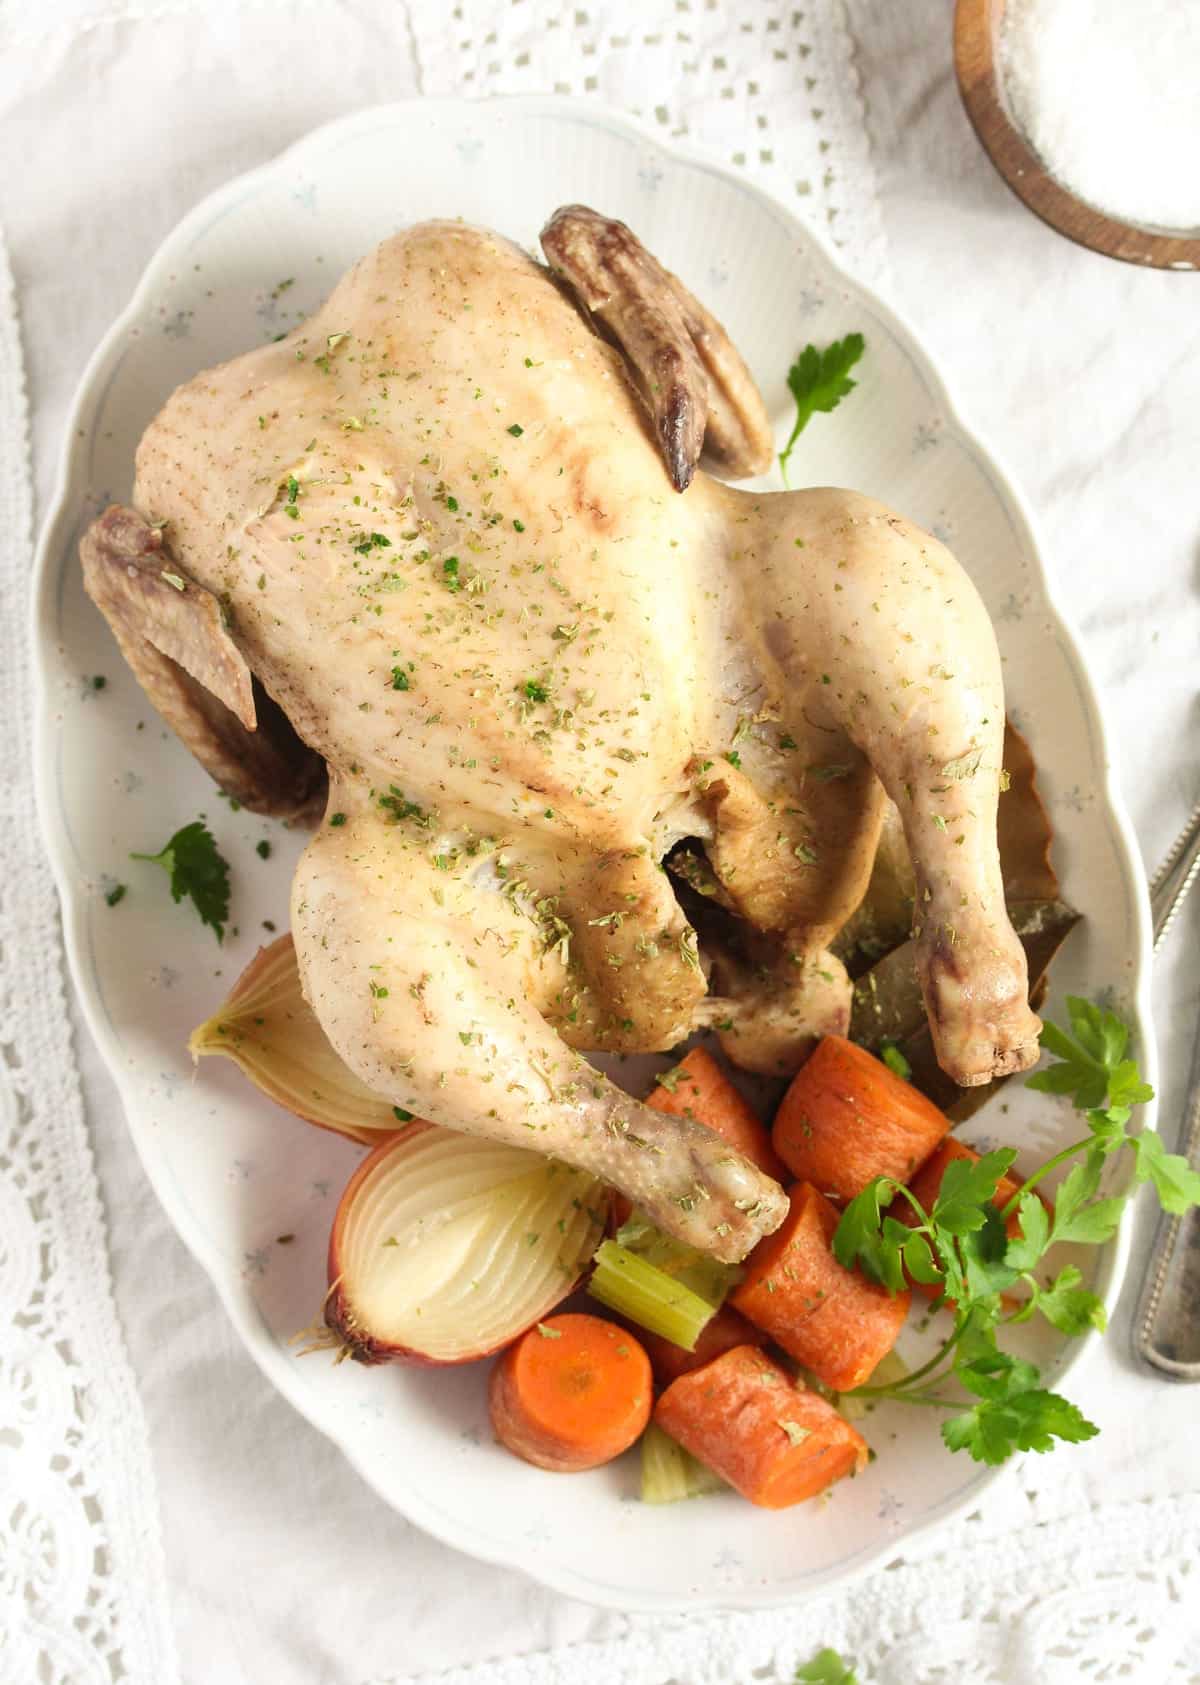 a whole boiled chicken on a platter with vegetables.